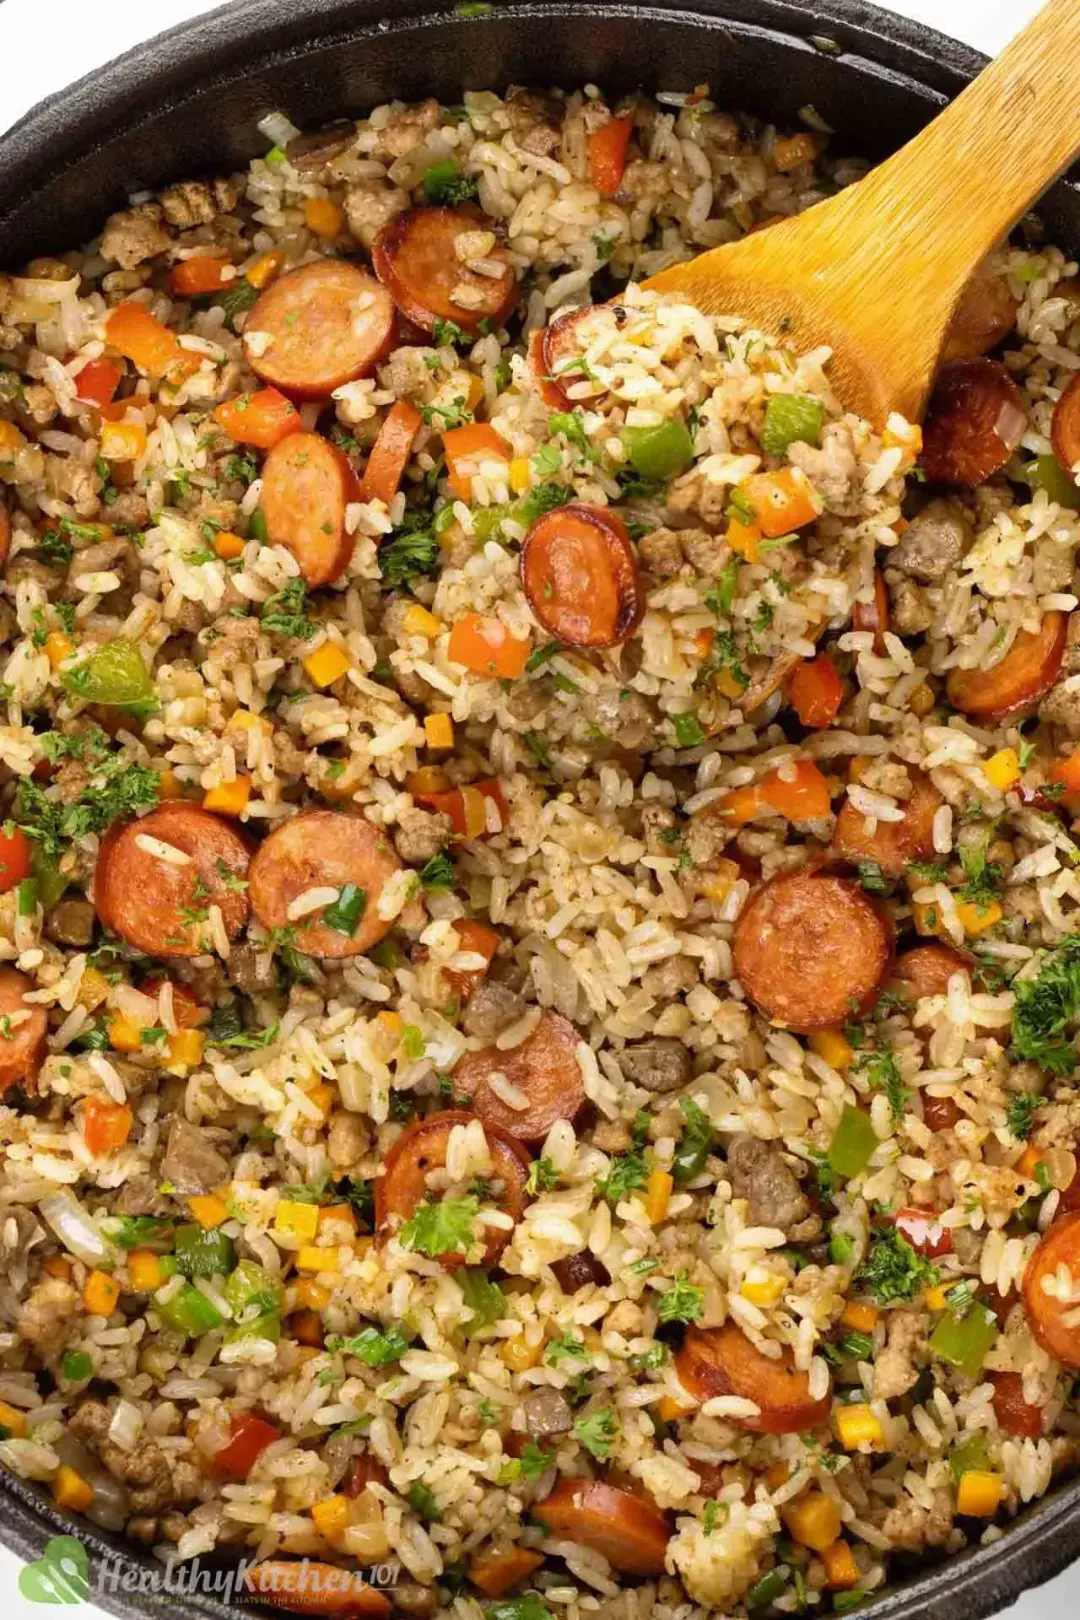 What Goes into a Dirty Rice Recipe